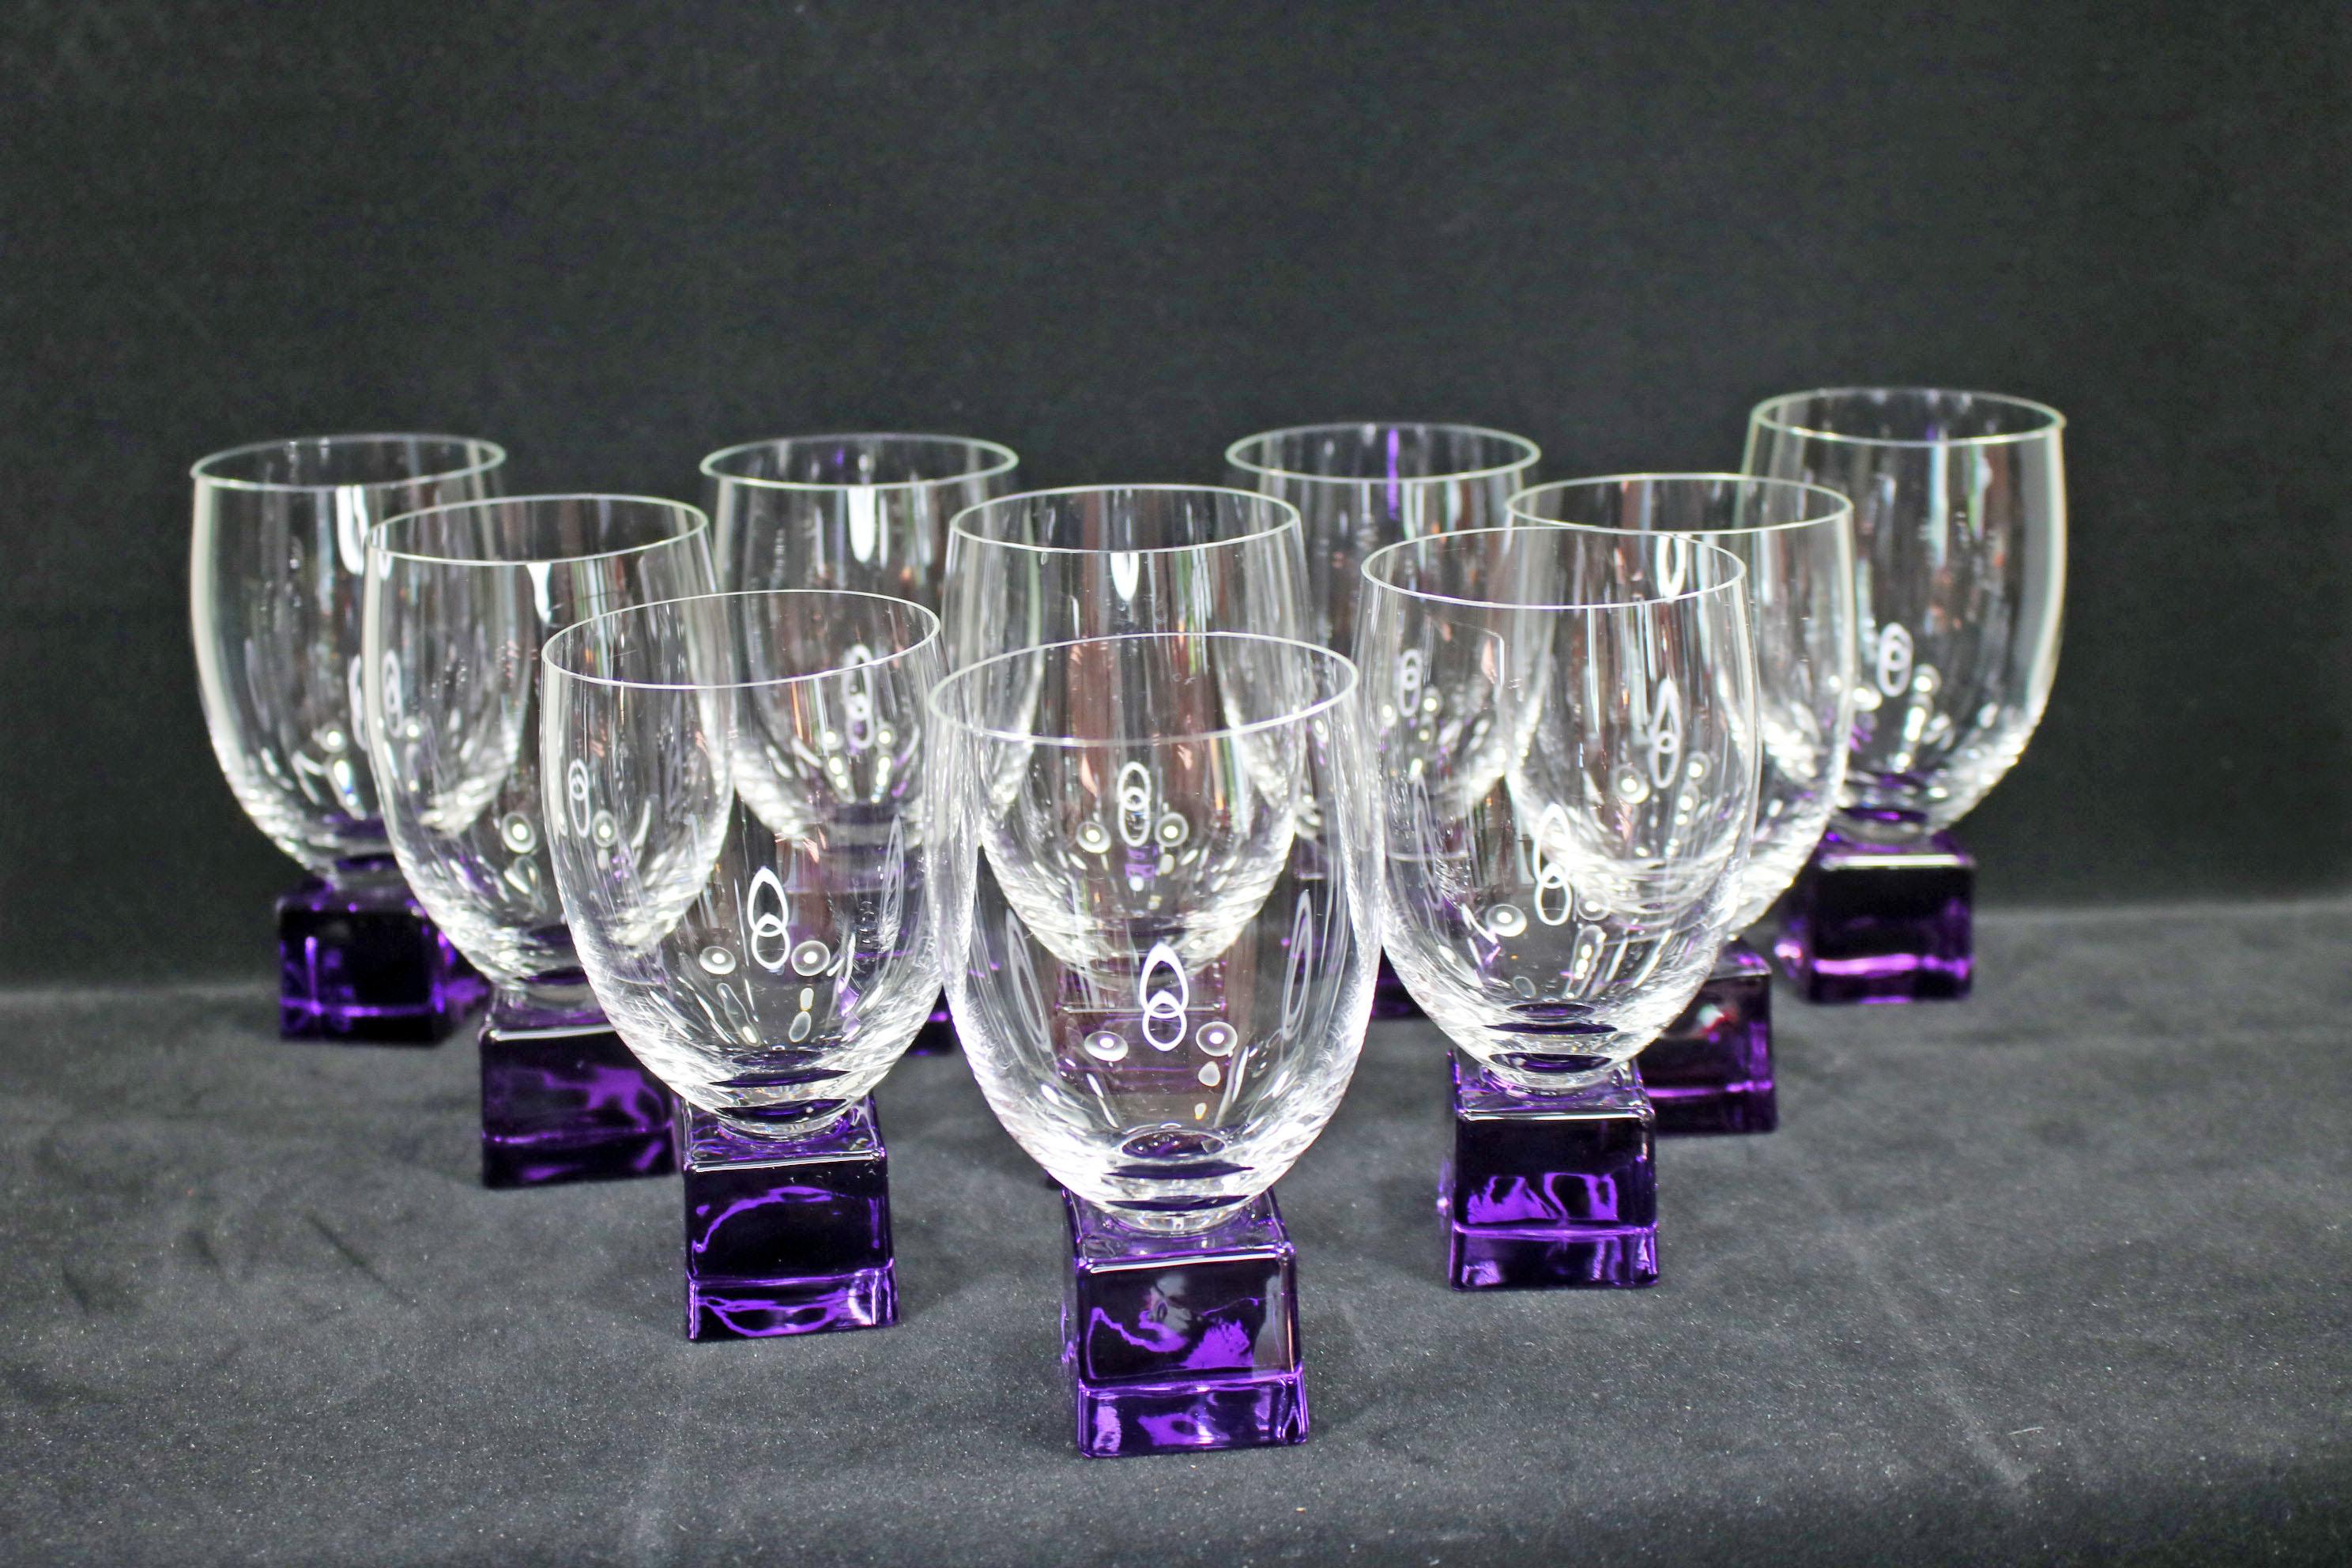 A beautiful and one of a kind set of 10 wine glasses. These were a part of a prototype production run, we were able to save only these 10 pieces as the rest was destroyed. The material is sodium potassium glass.